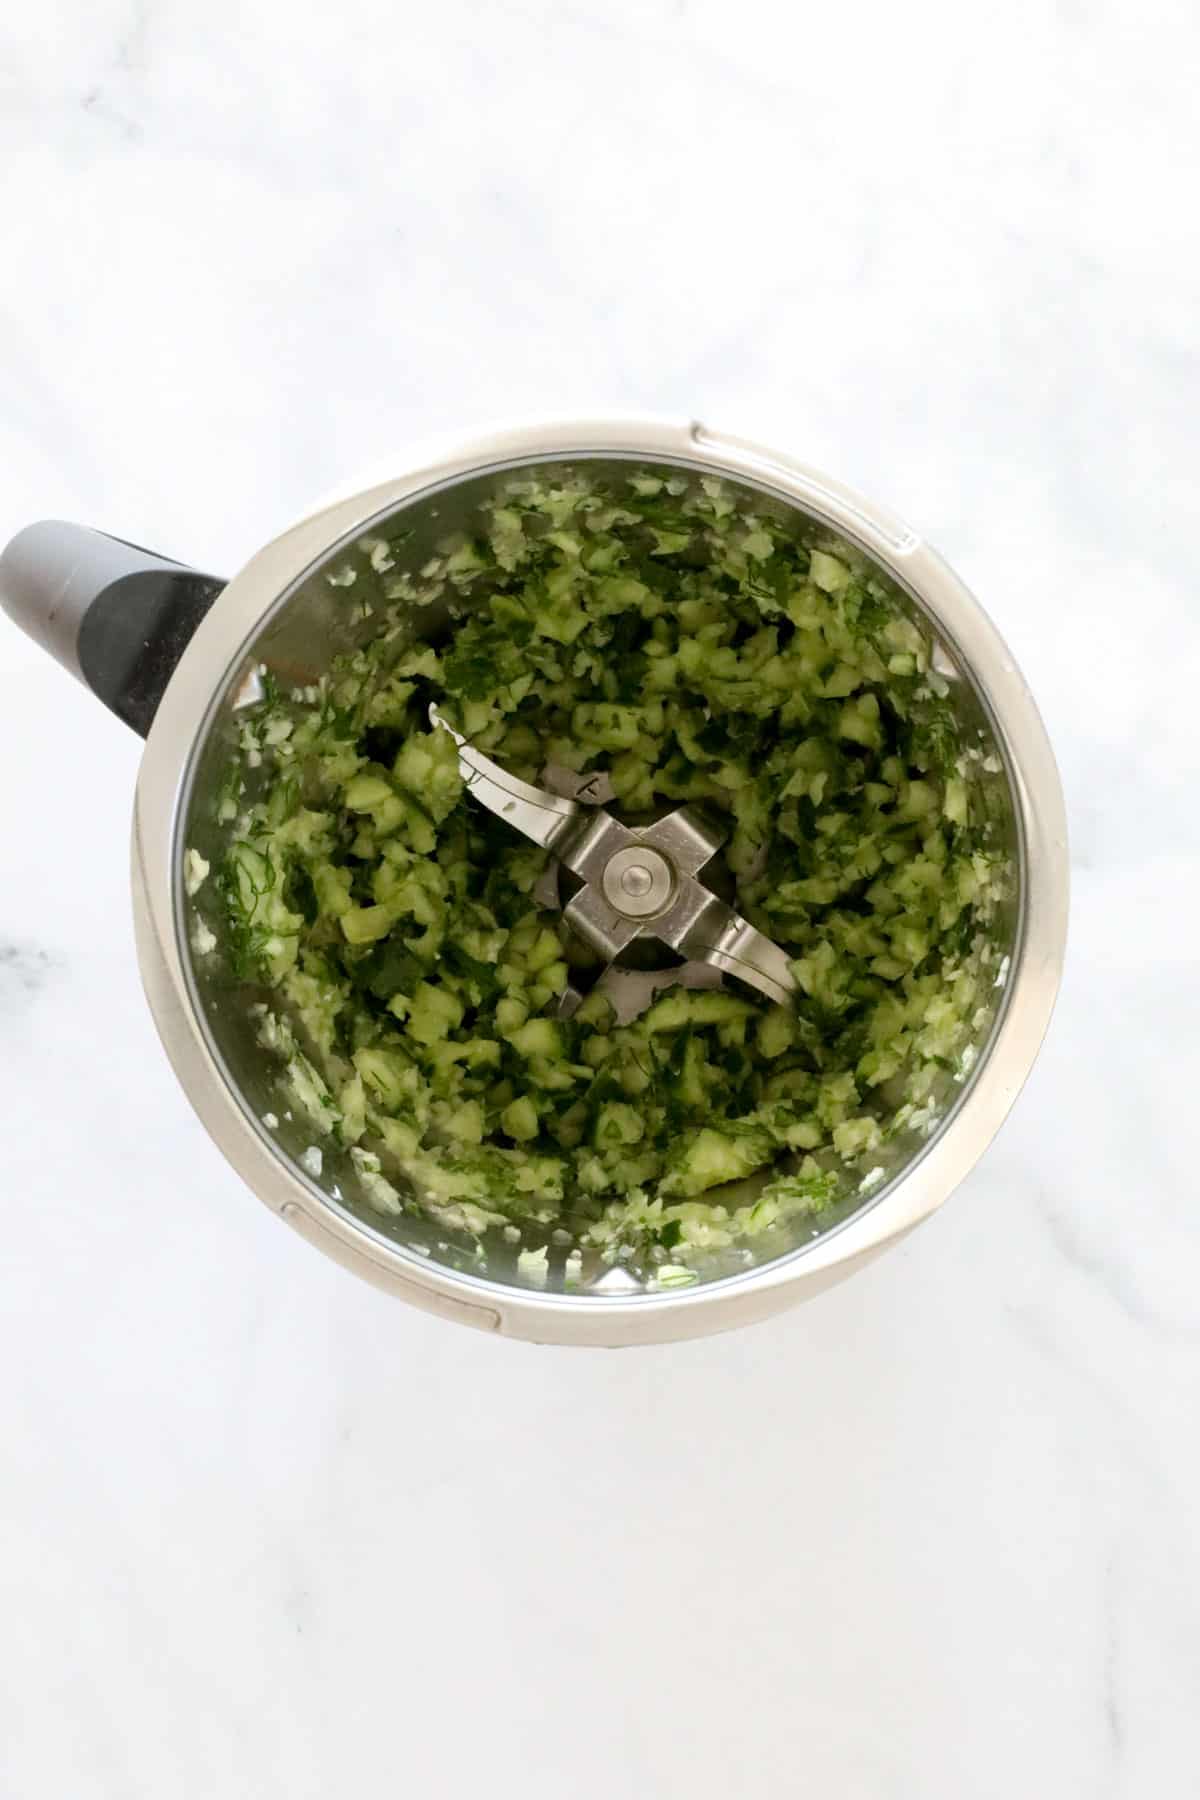 Chopped cucumber, garlic, mint and dill in a Thermomix.